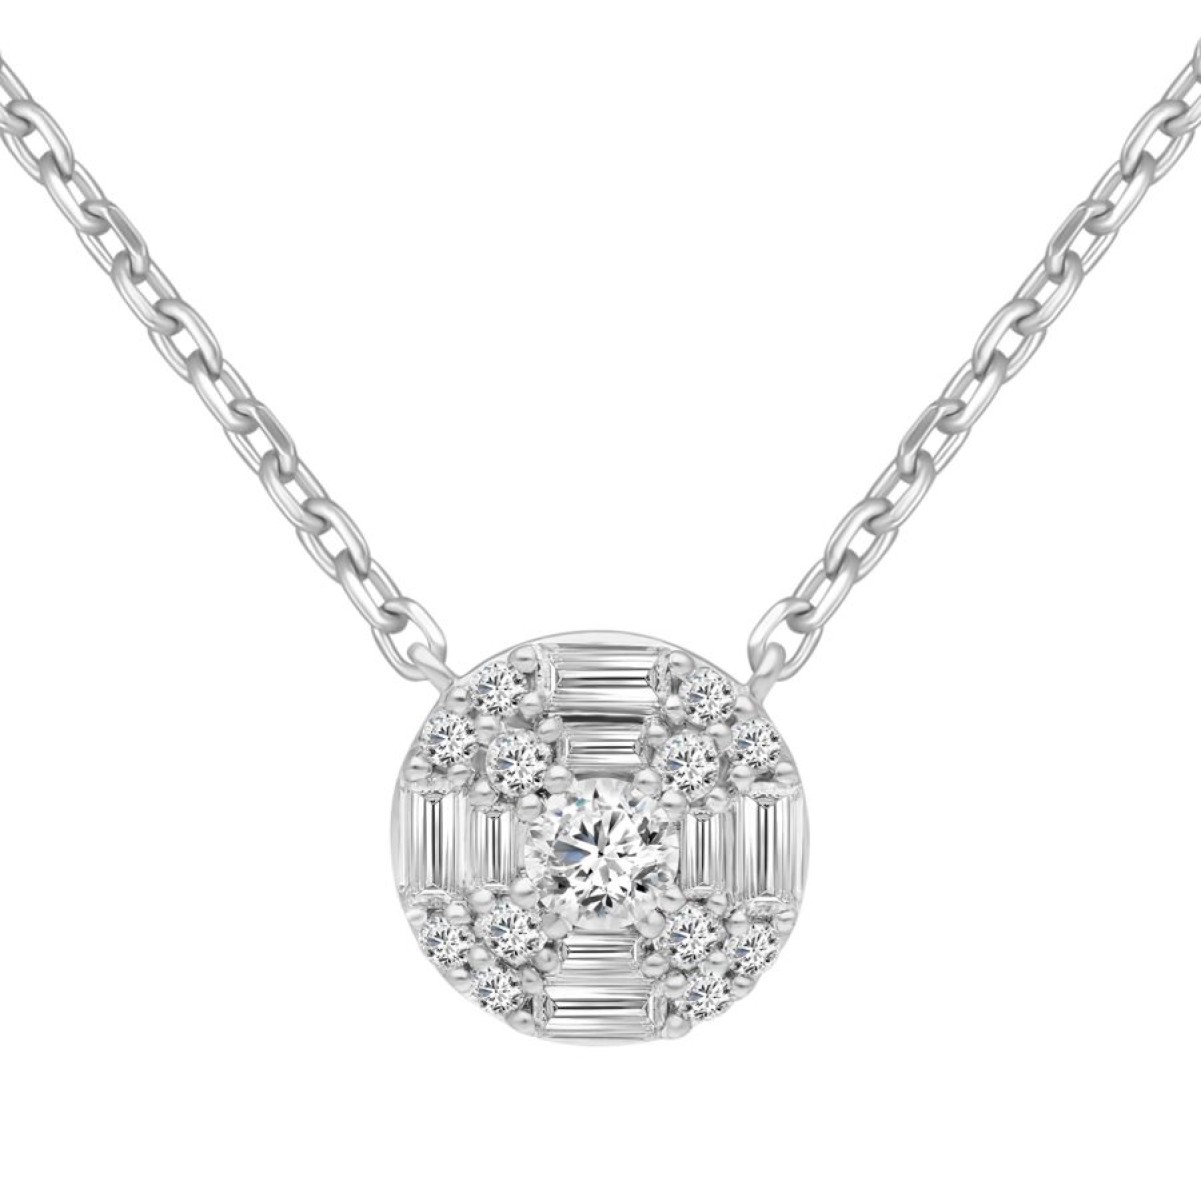 14K WHITE GOLD 1/2CT ROUND/BAGUETTE DIAMOND LADIES PENDANT WITH CHAIN 